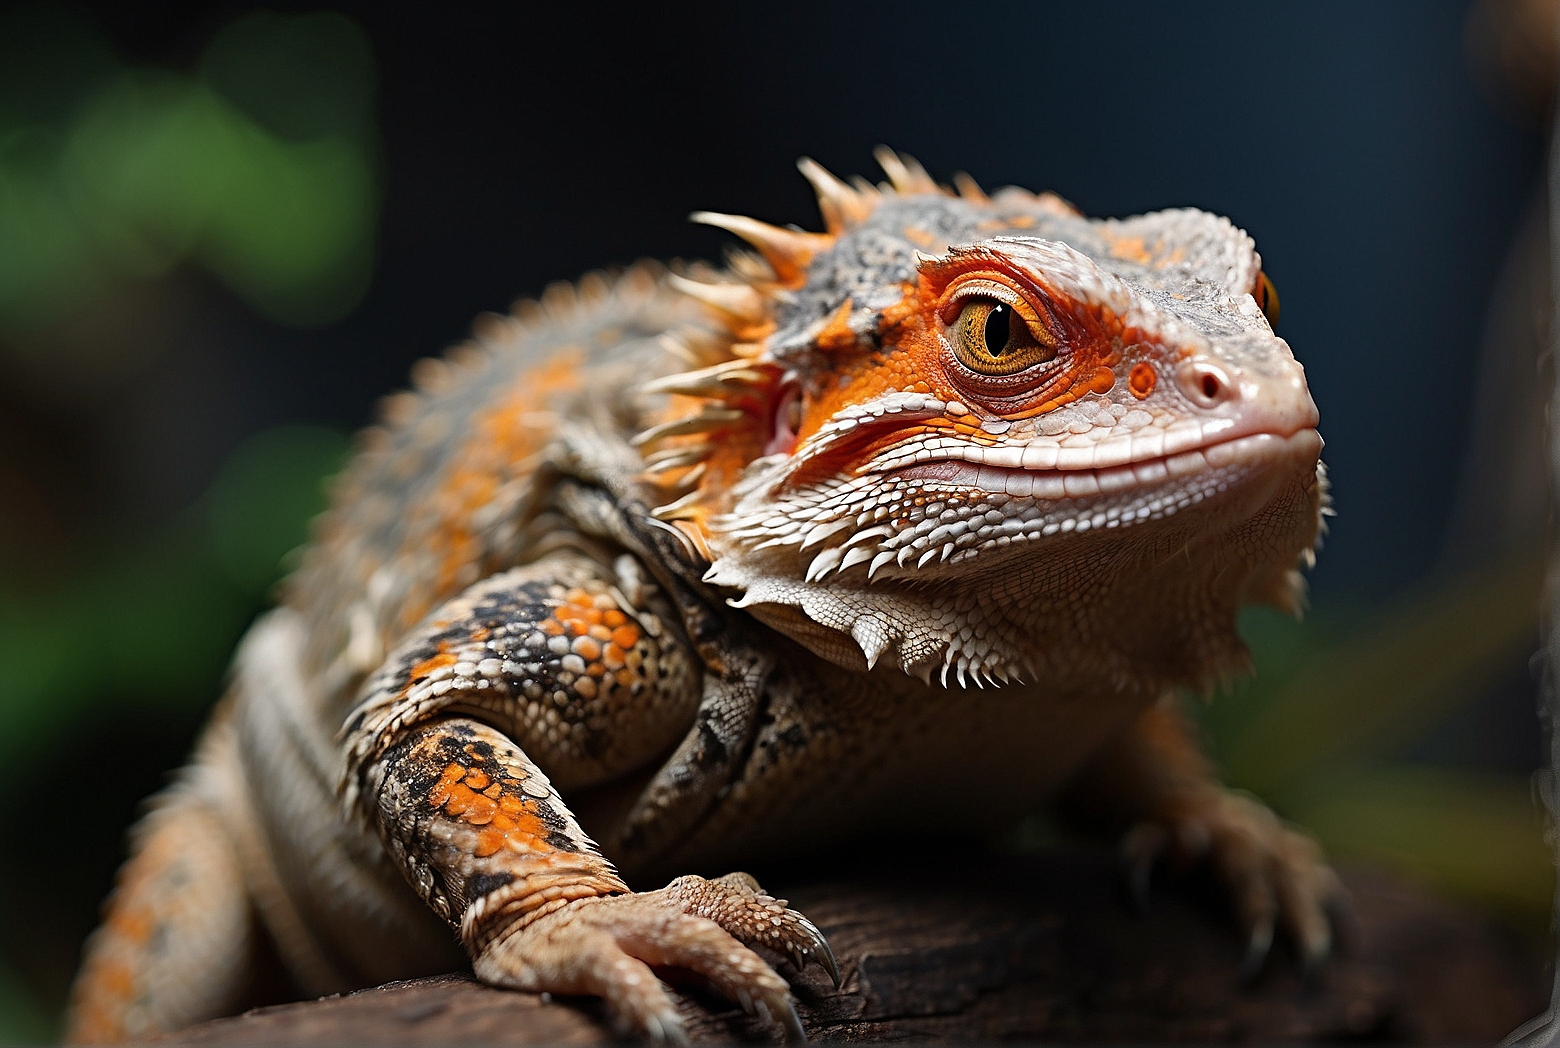 Are Bearded Dragons Easy To Maintain?